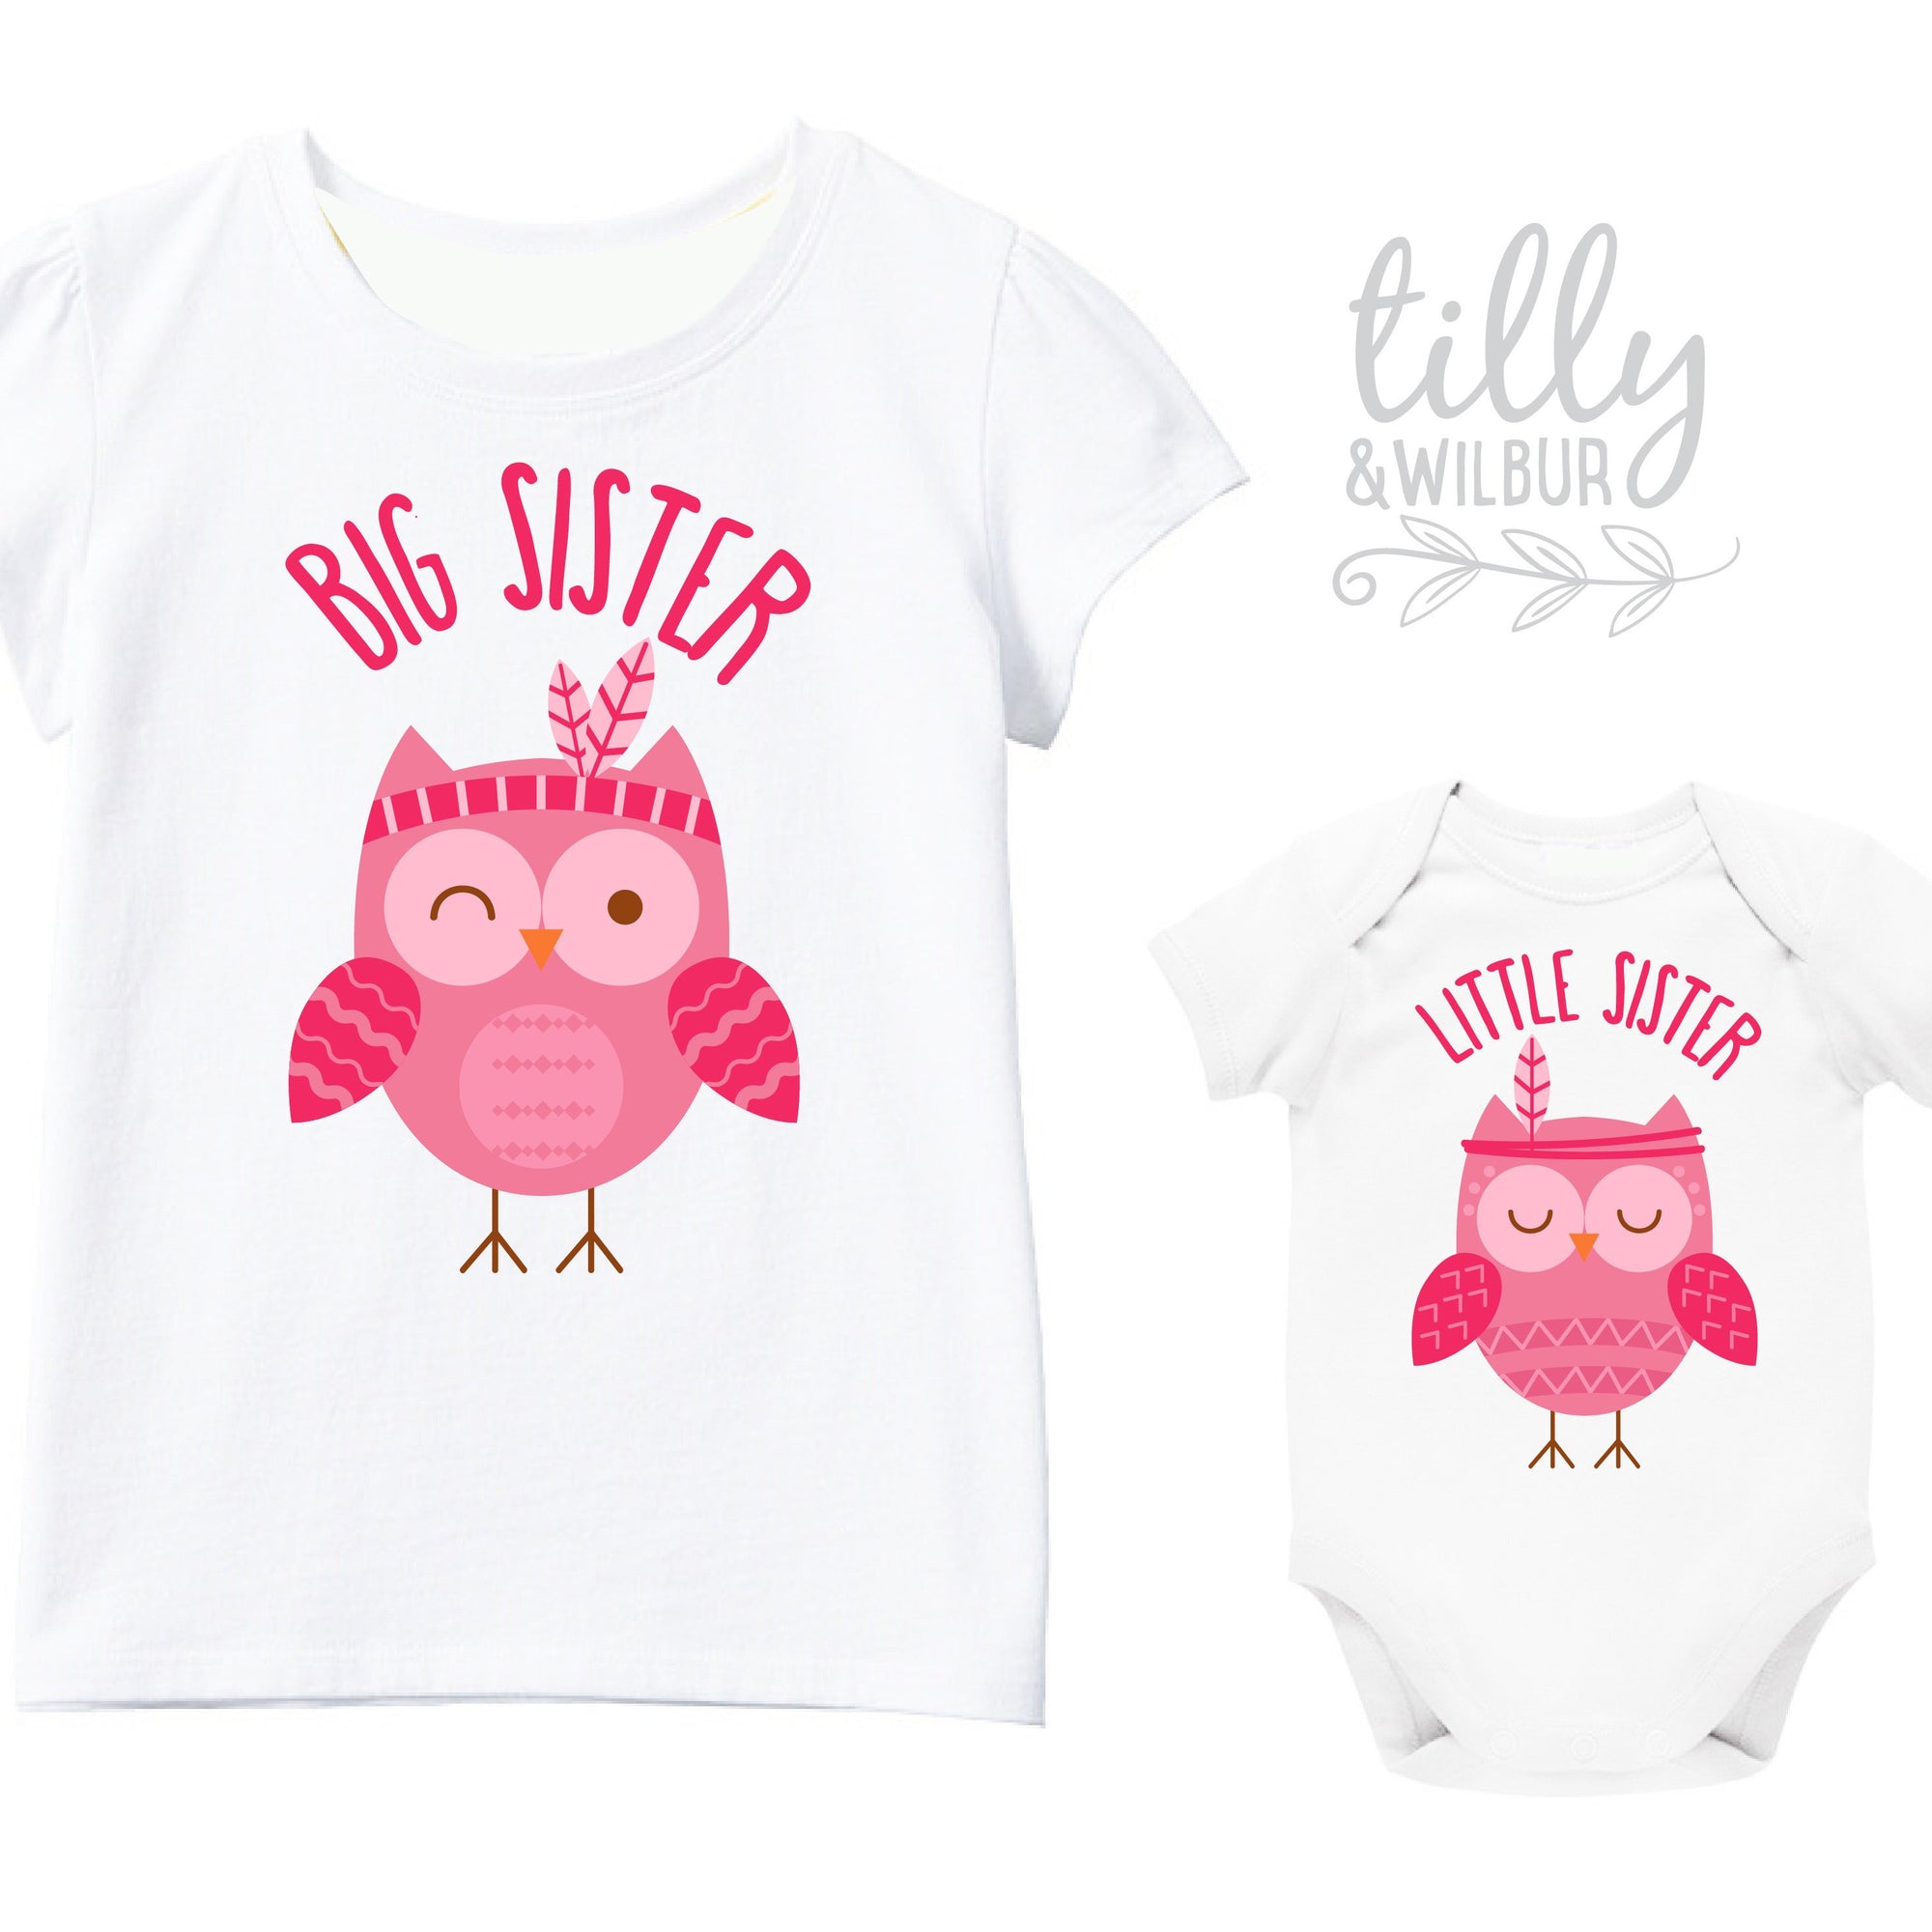 Big Sister Little Sister Owl Set, Matching Sister Outfits, Matchy Matchy Sister T-Shirts, Big Sister Shirt, Baby Shower Gifts, Sister Tees